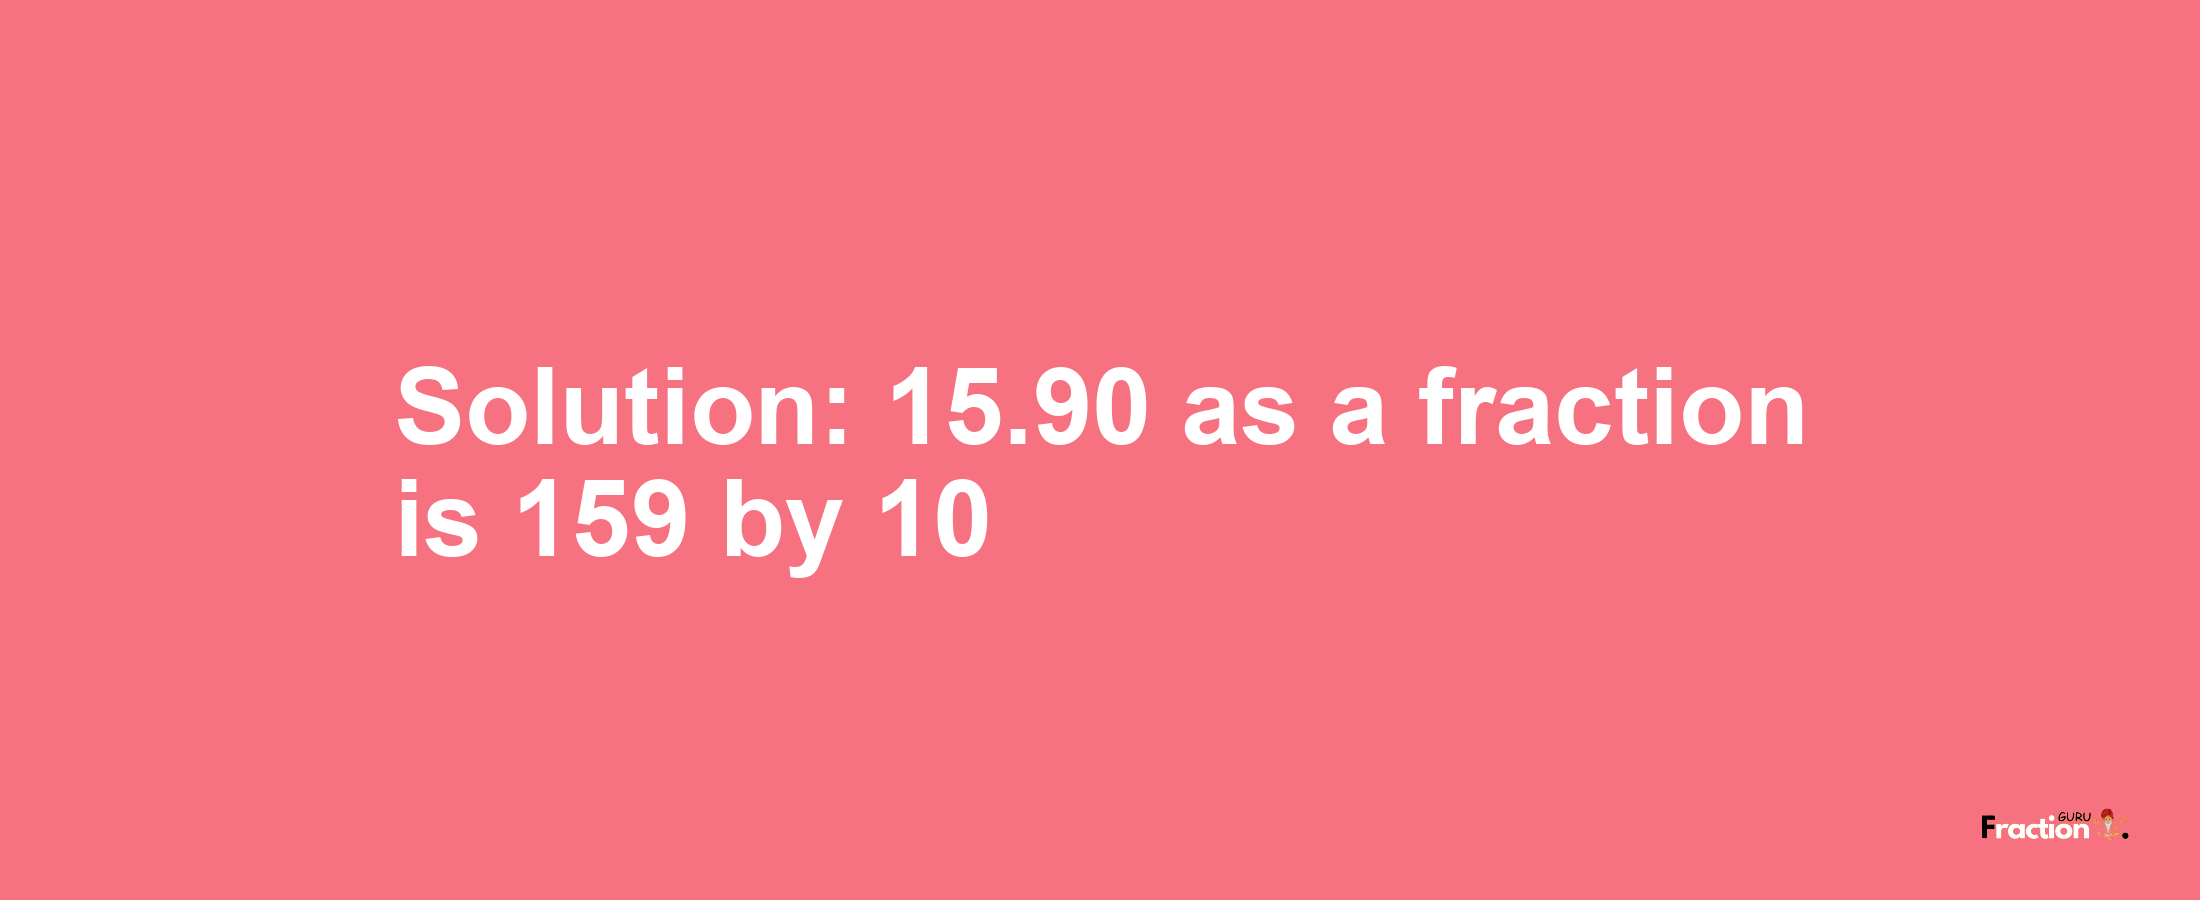 Solution:15.90 as a fraction is 159/10